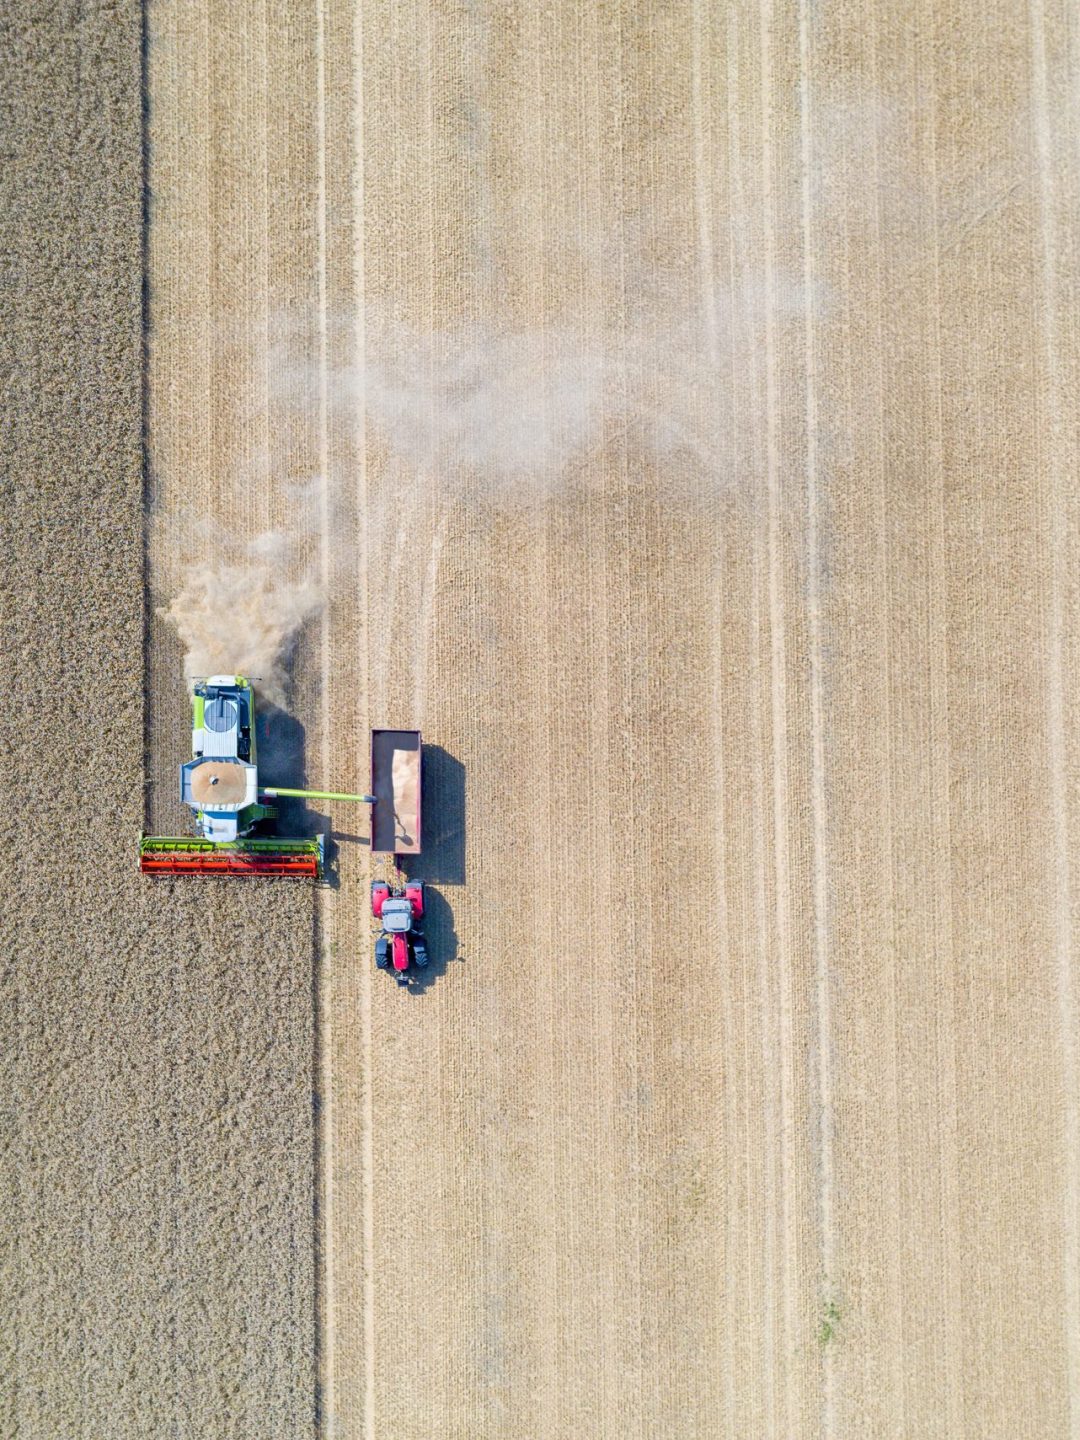 Combine harvester and a tractor harvesting the wheat on a field, Jutland, Denmark.